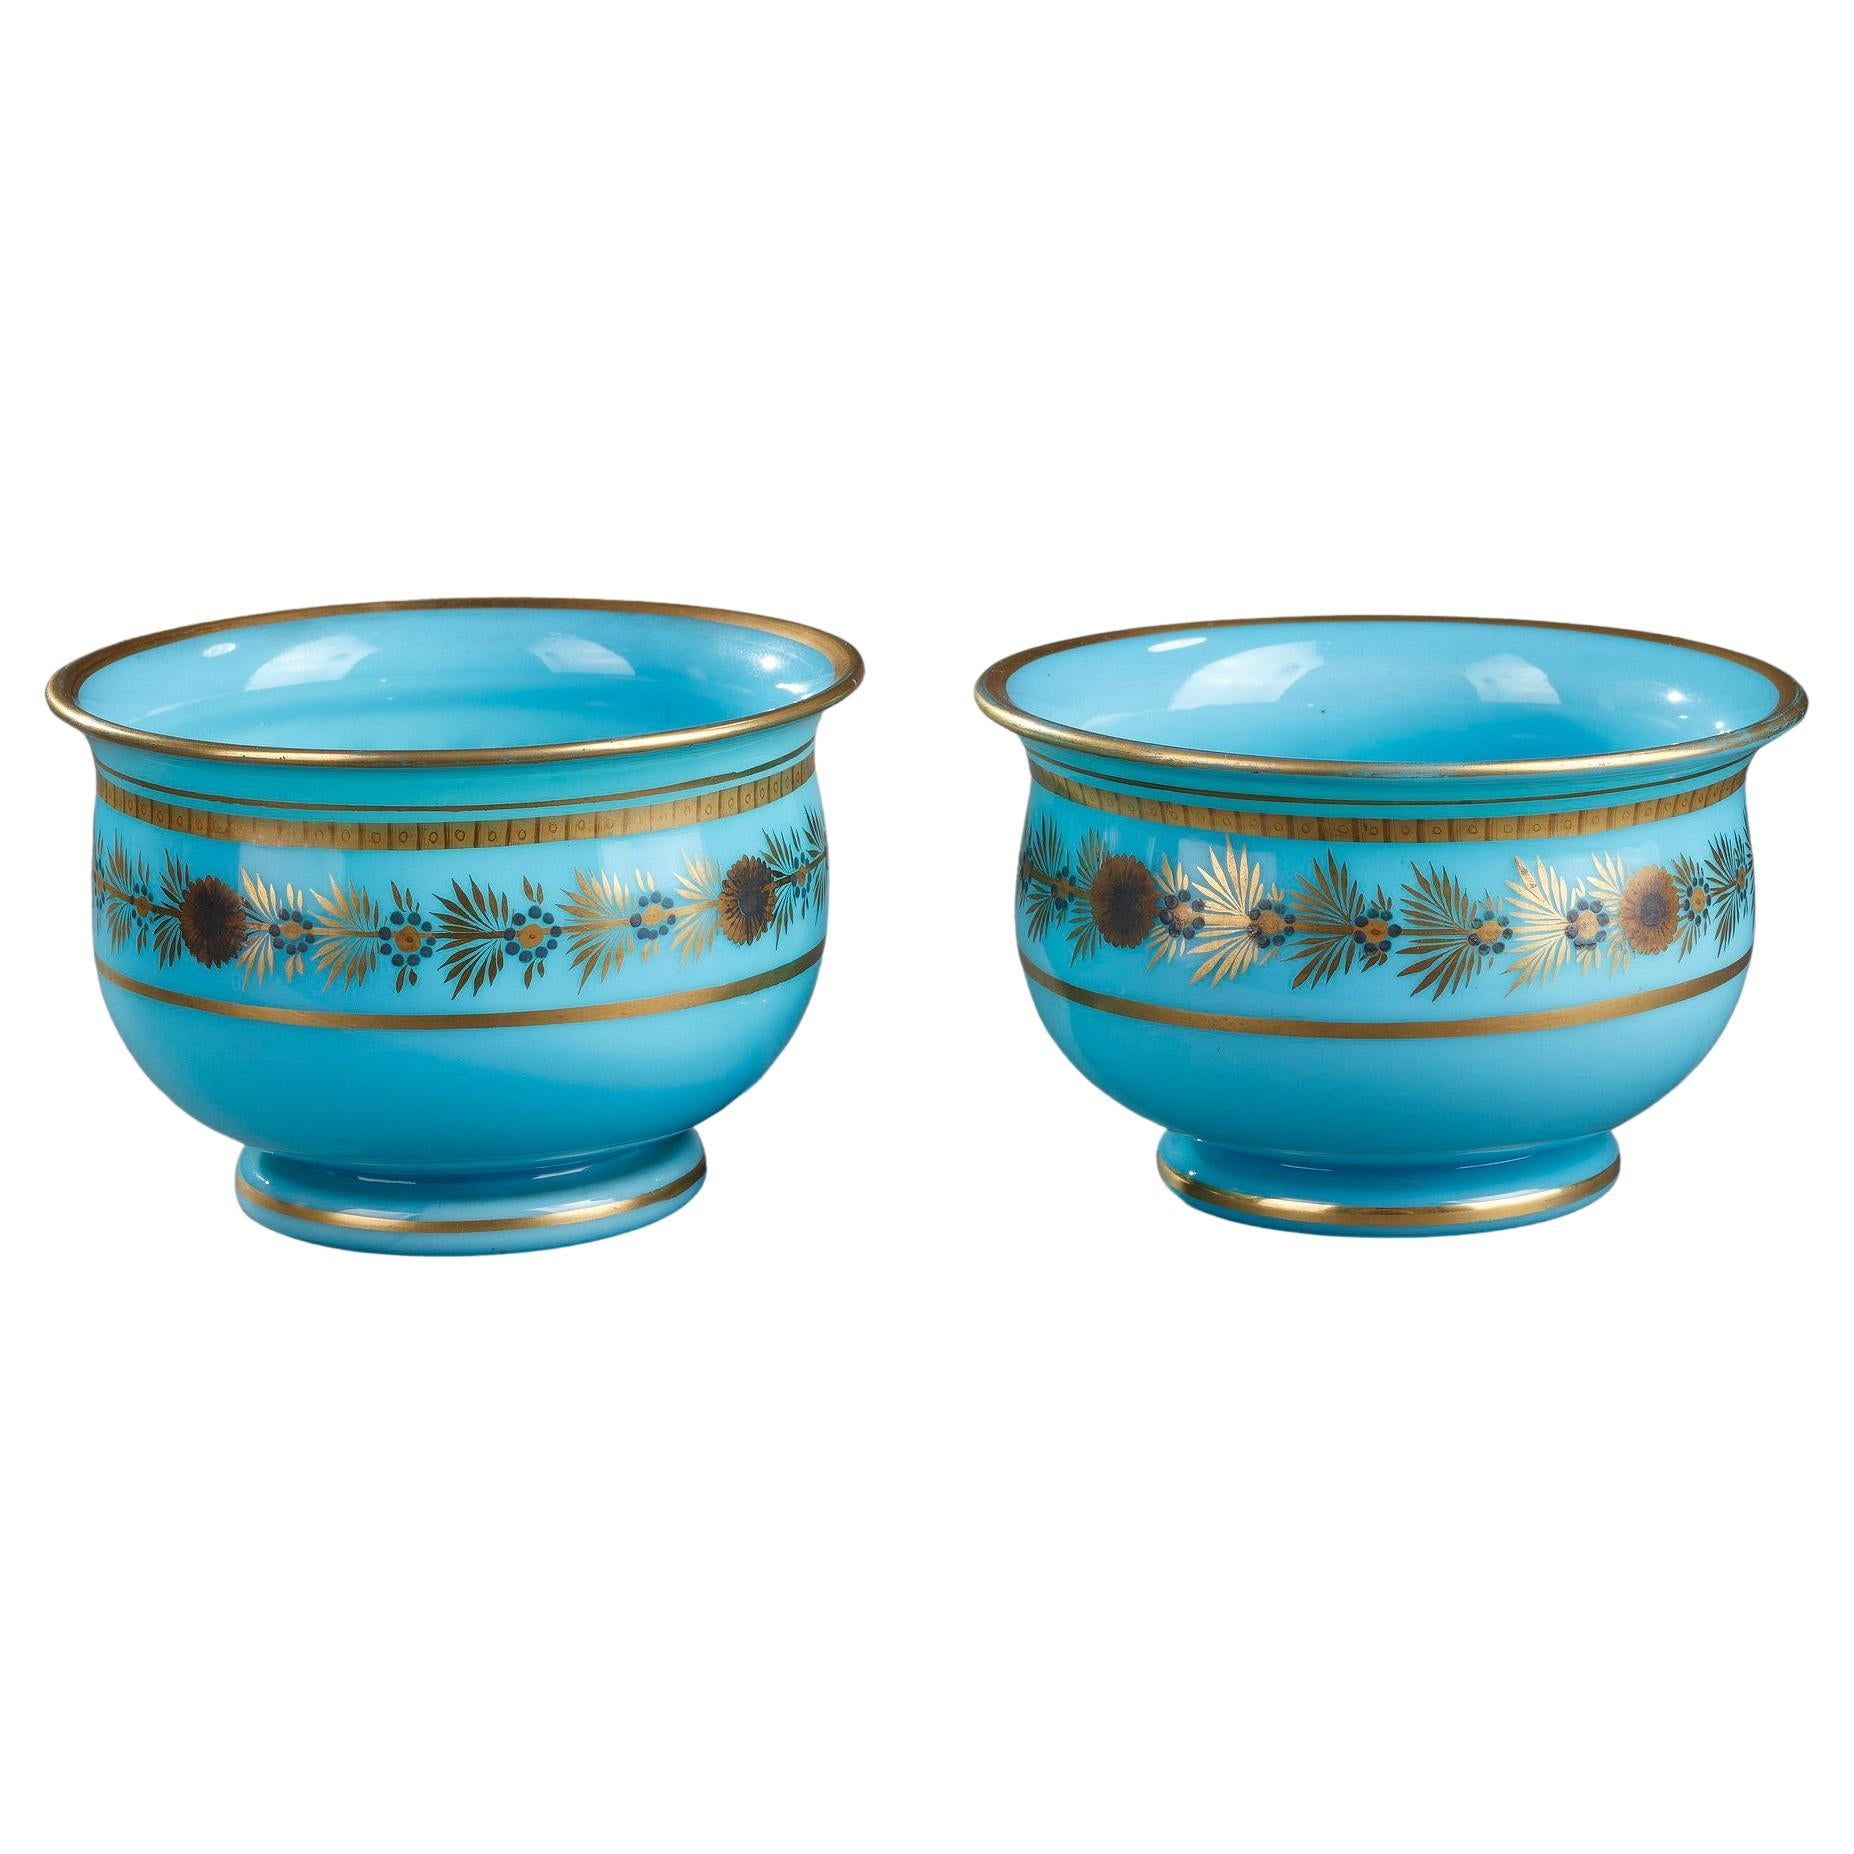 Pair of Early 19th Century Blue Opaline Bowls by Desvignes For Sale